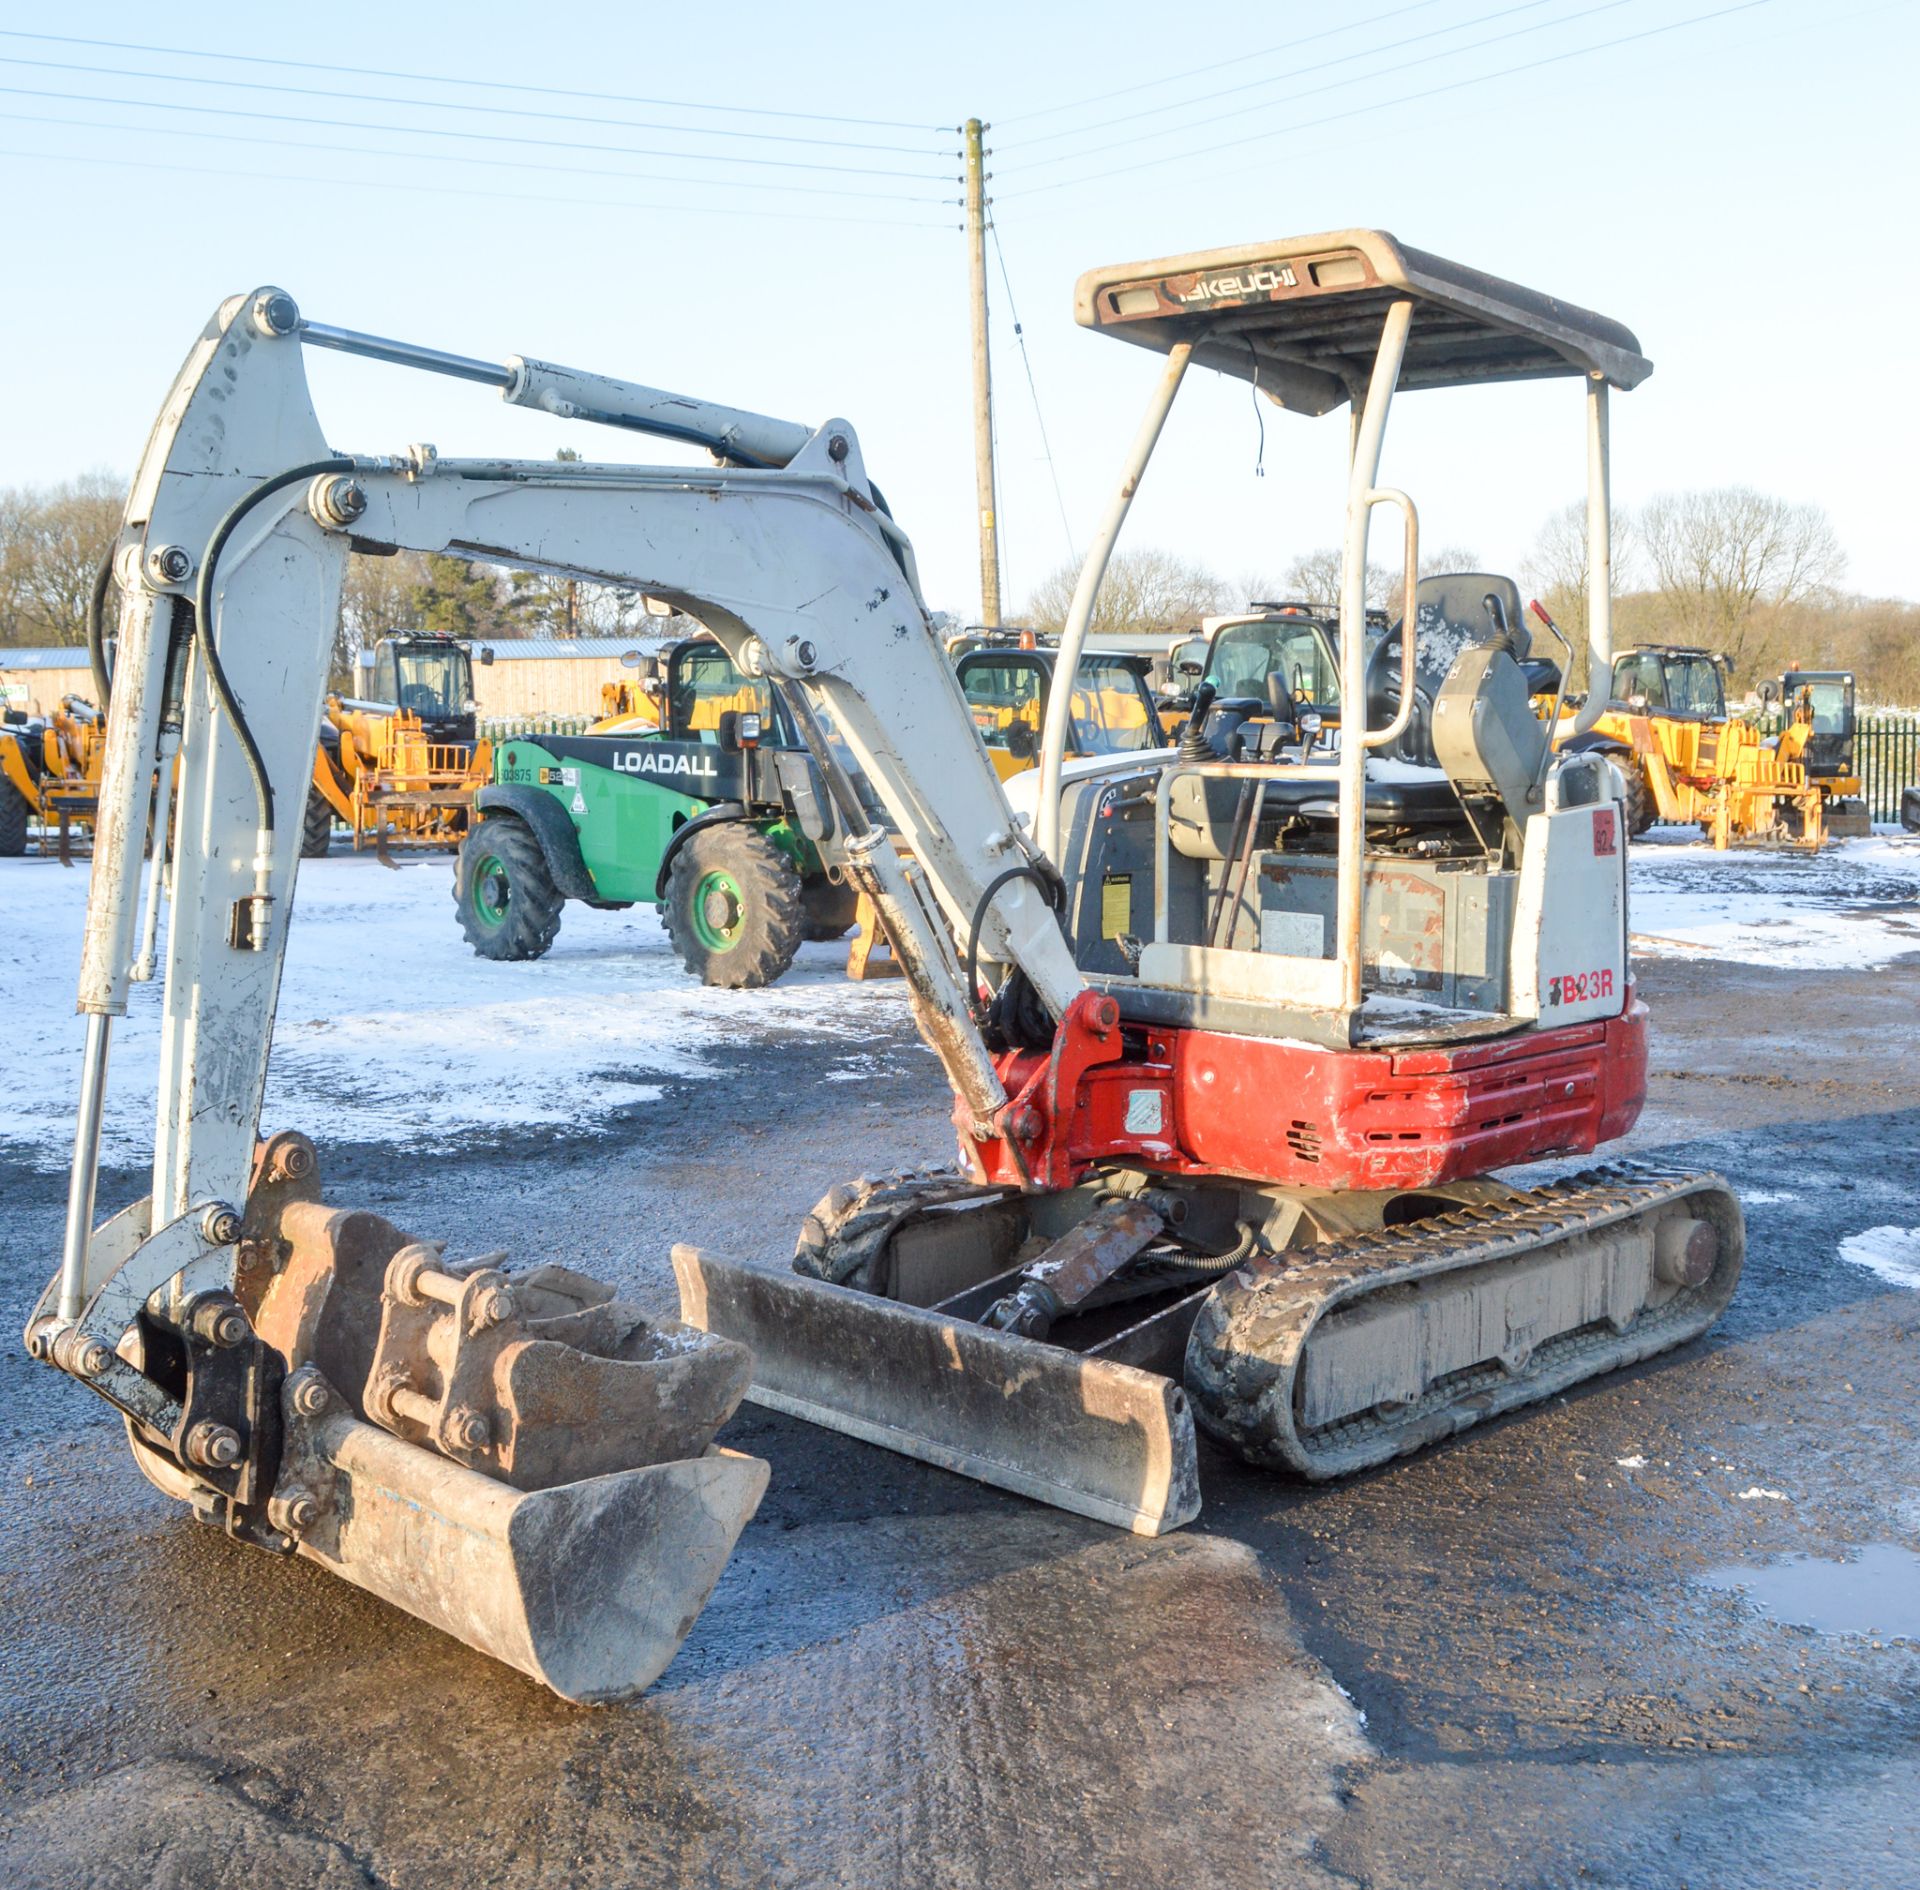 Takeuchi TB23R 2.3 tonne rubber tracked mini excavator Year: 2007 S/N: 12300872 Recorded hours: